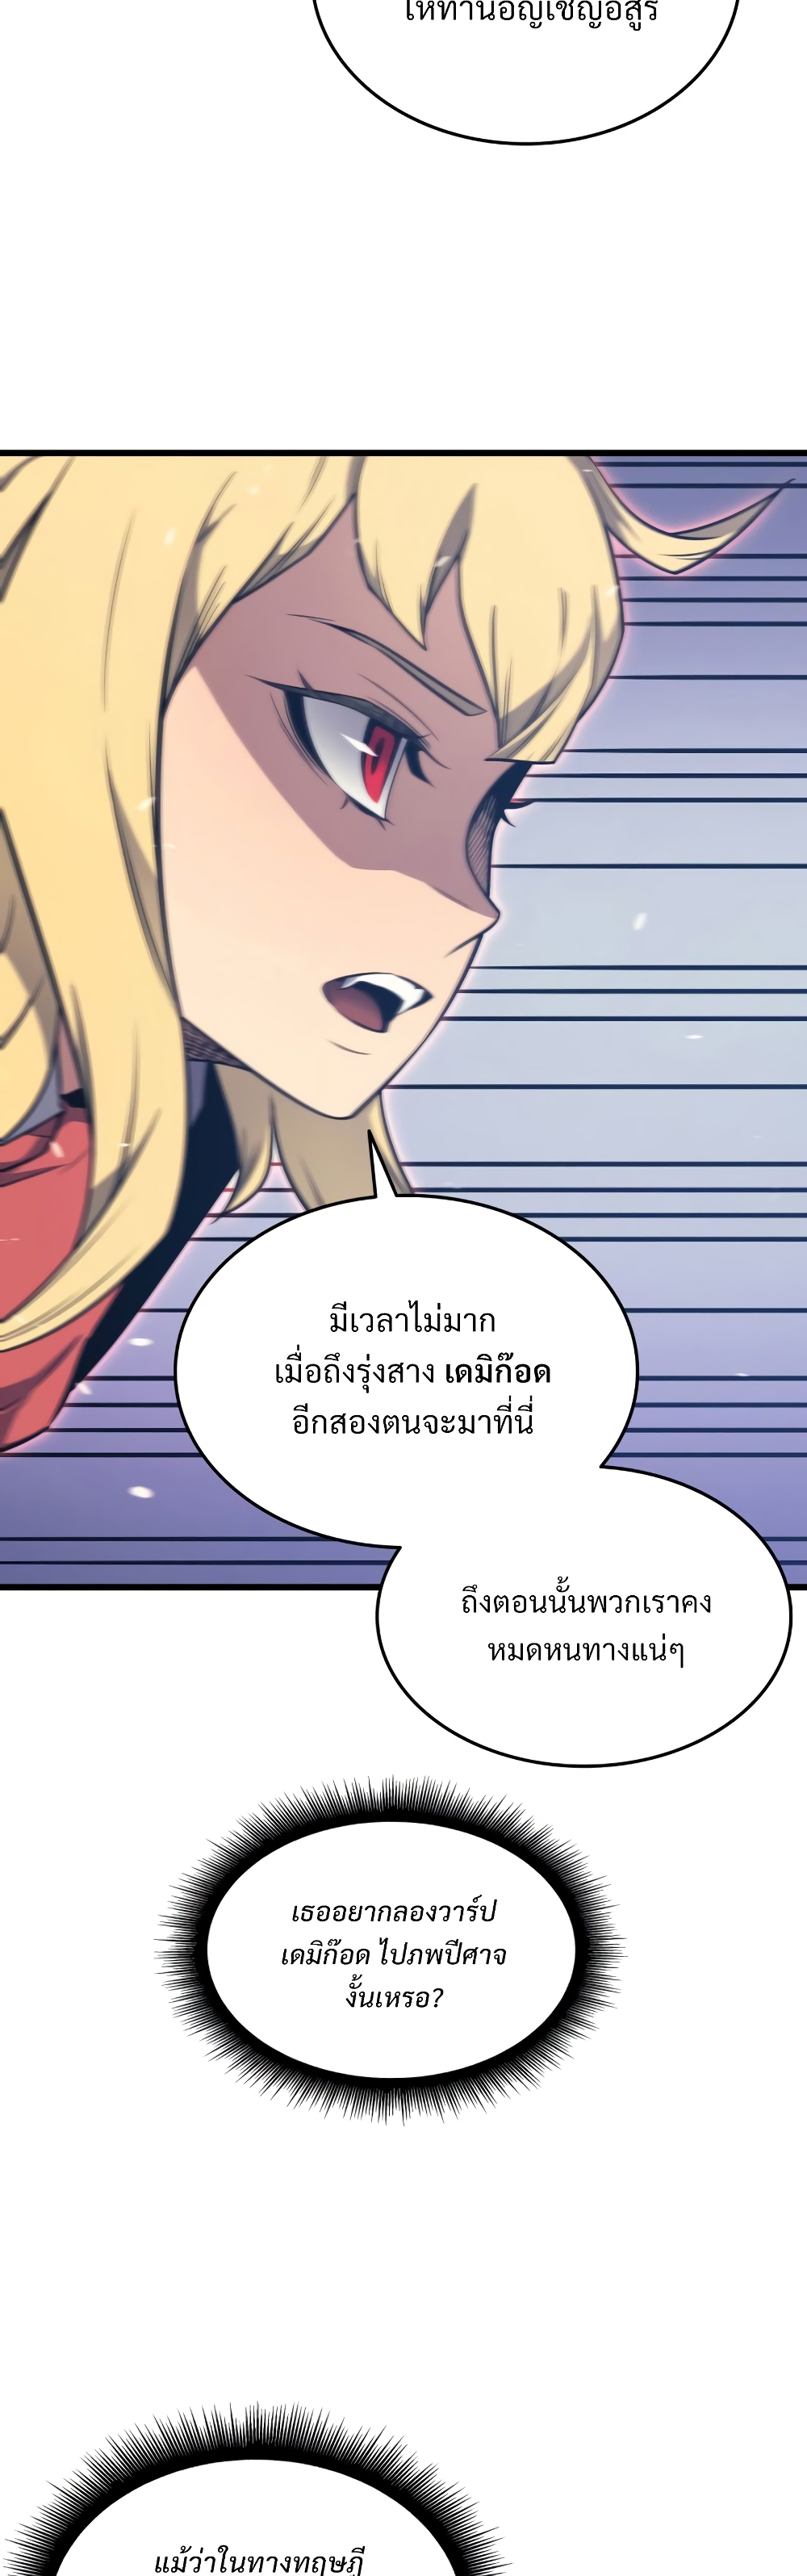 The Great Mage Returns After 4000 Years 121 แปลไทย